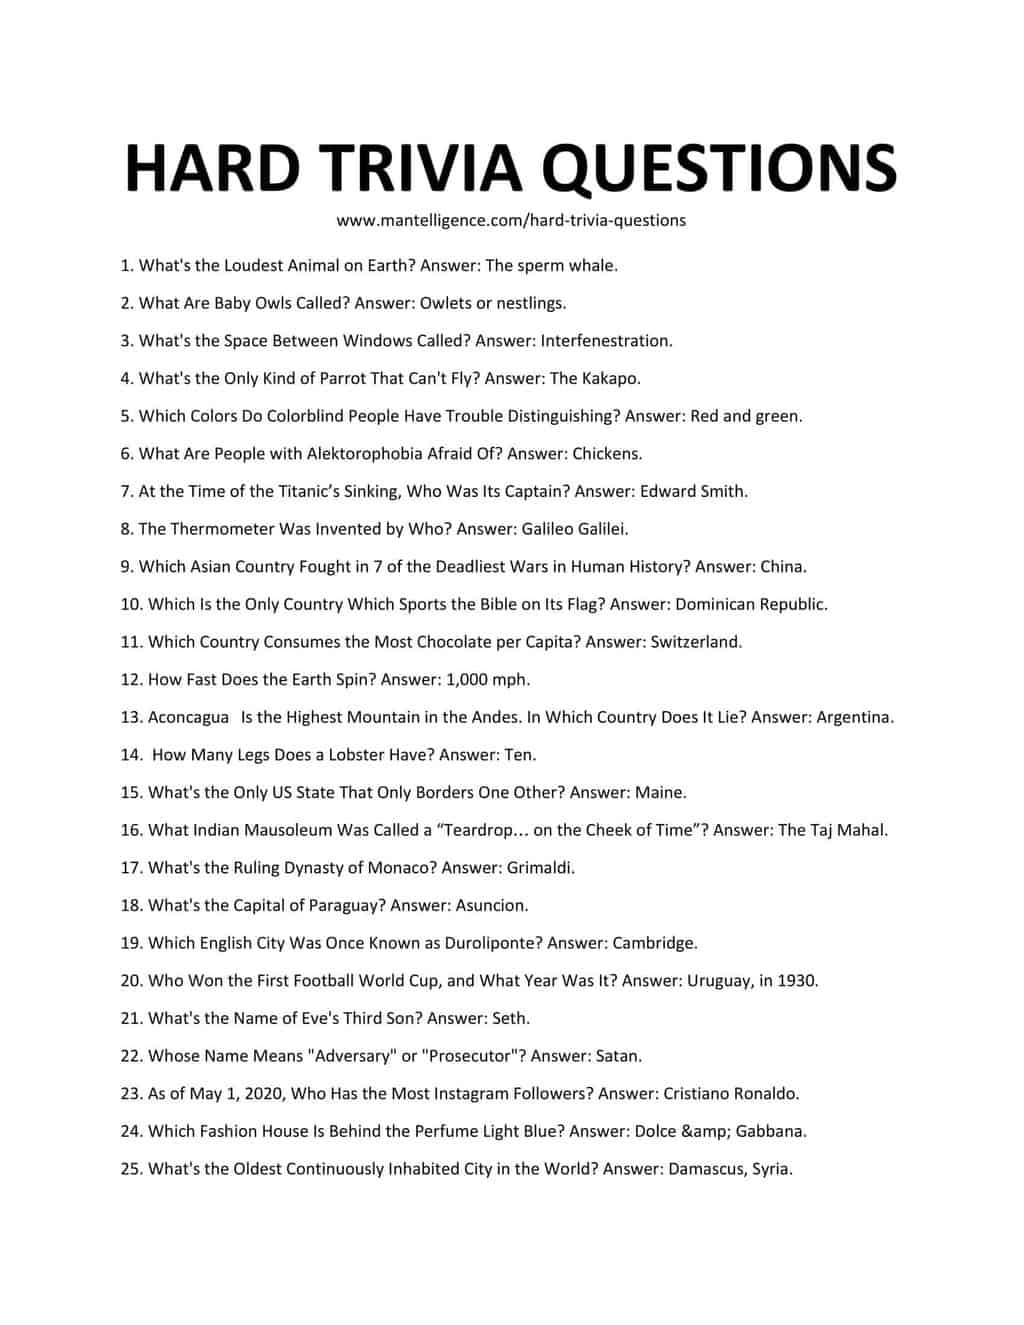 Hard Trivia Questions And Answers Printable